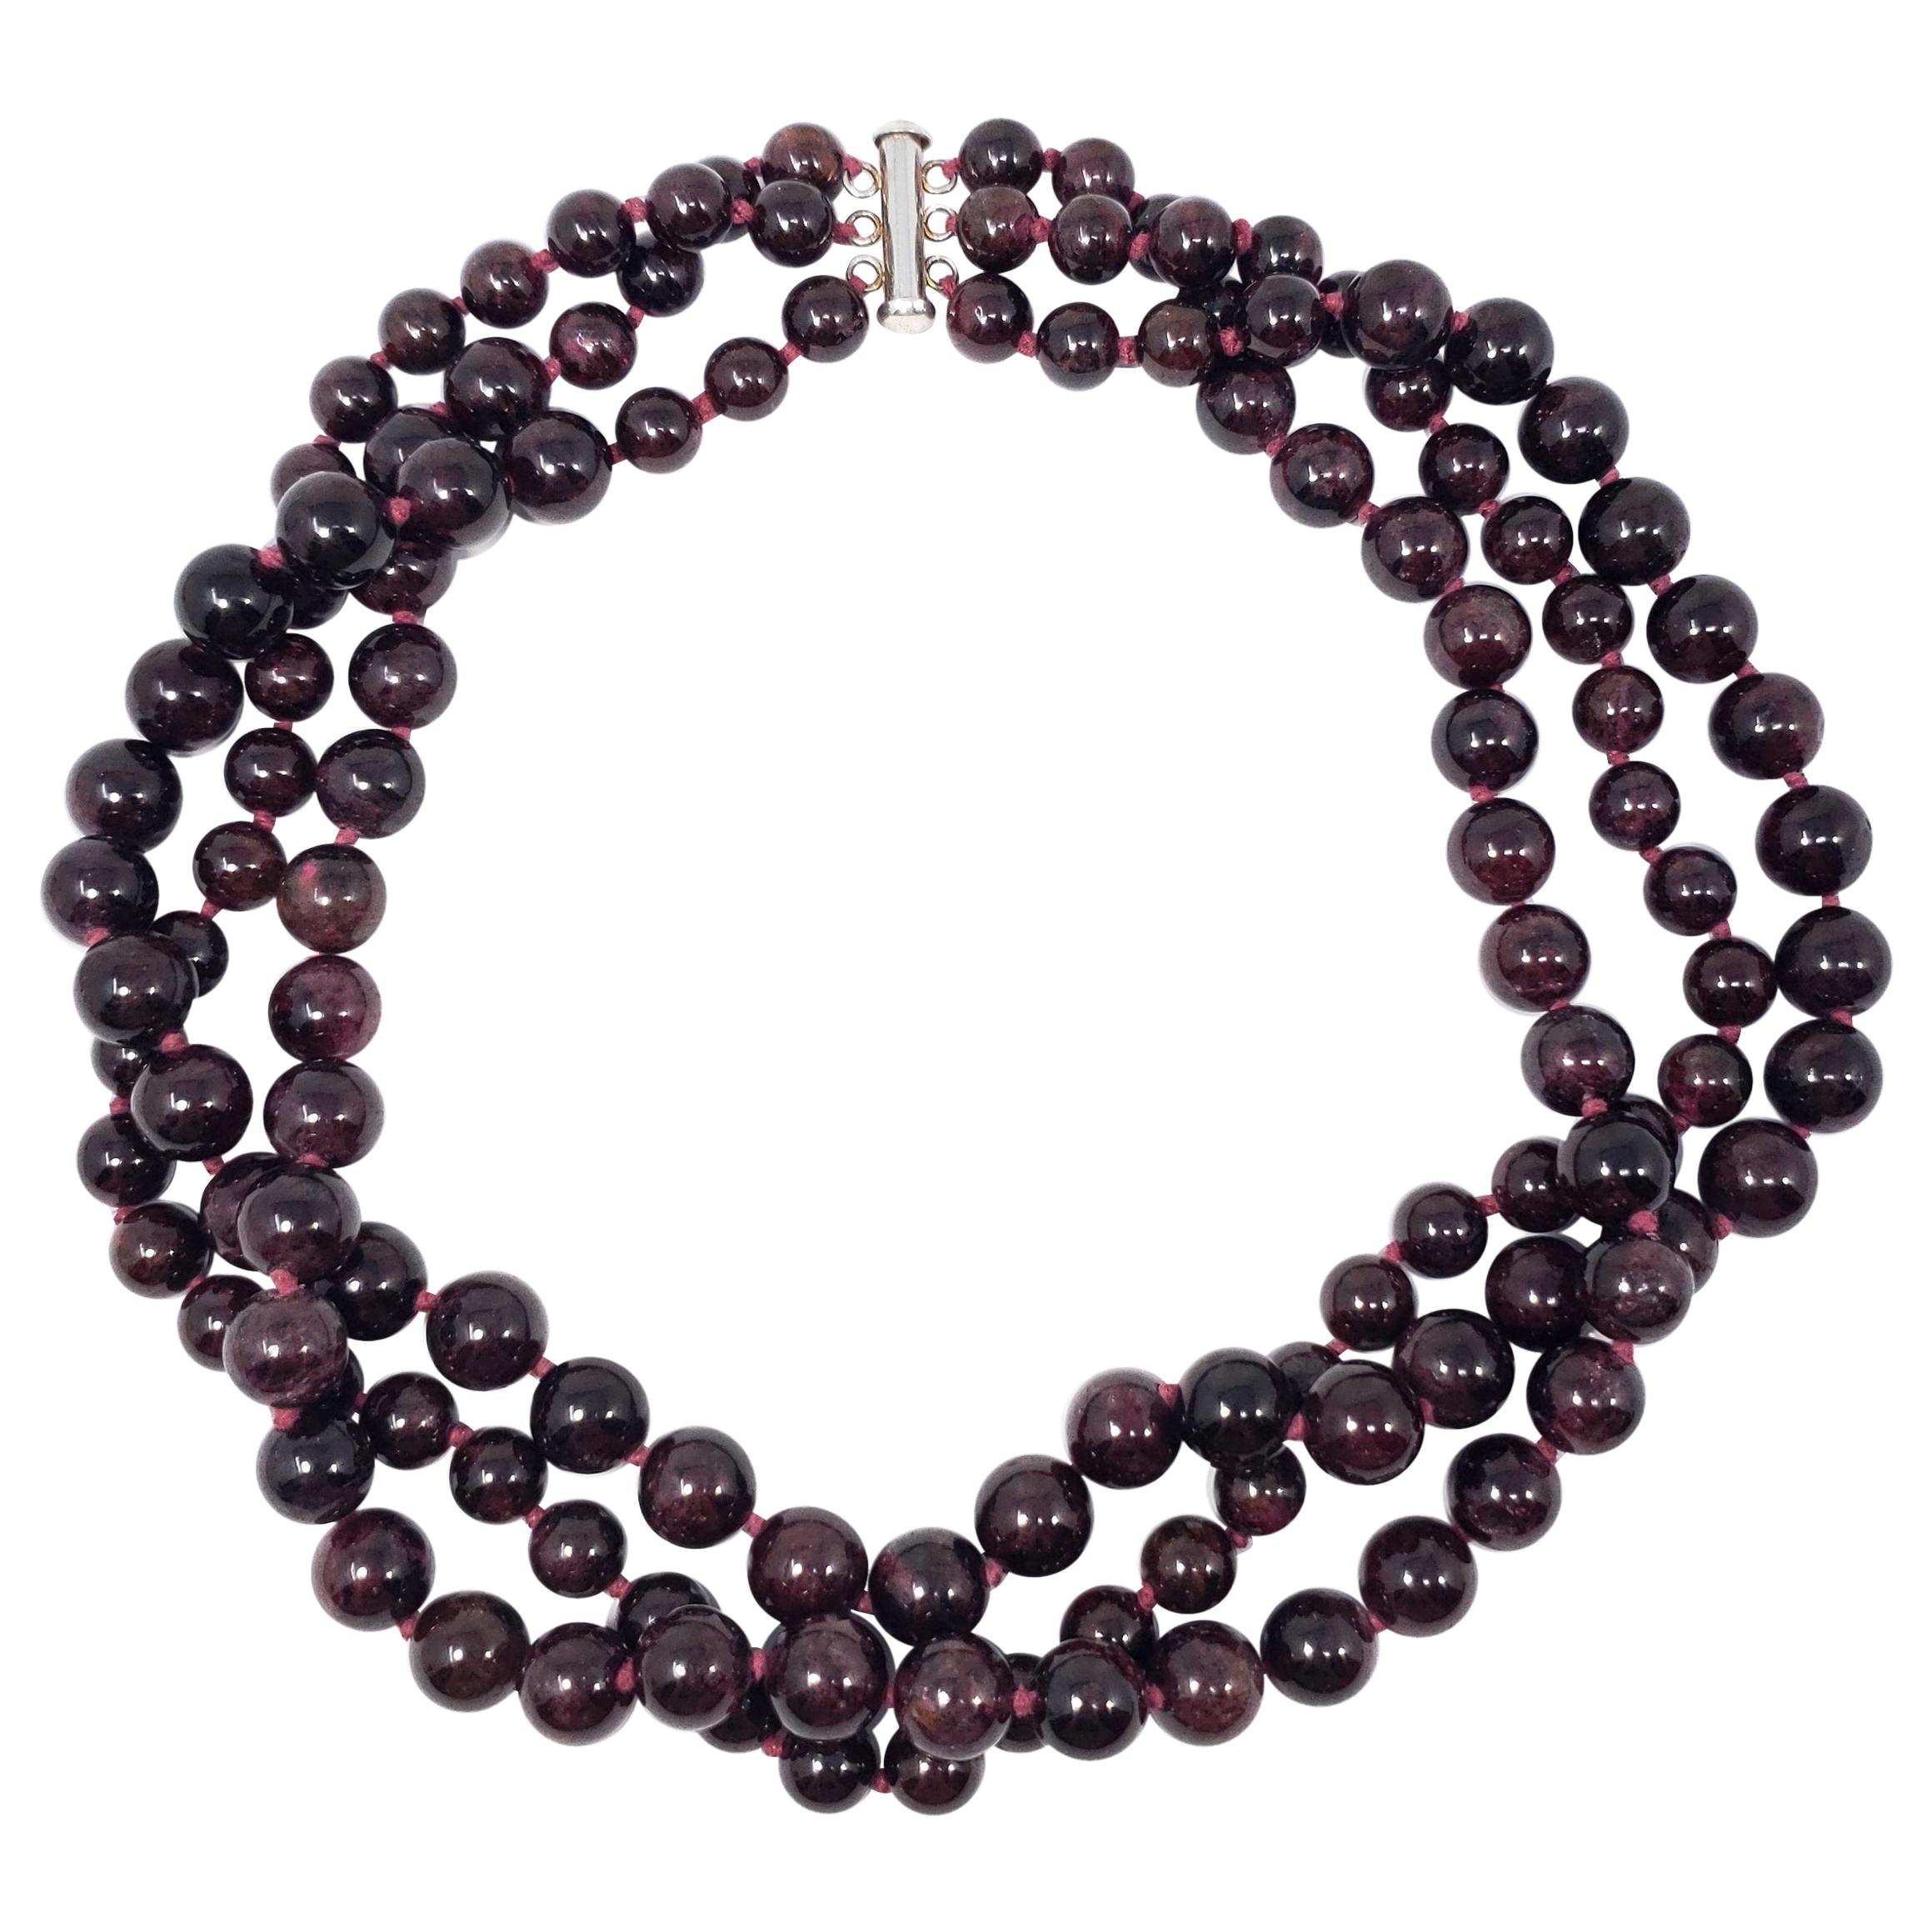 BEAUTIFUL NATURAL GARNET GEMSTONE TUMBLED BEADS NECKLACE 18" 925 SILVER CLASP 